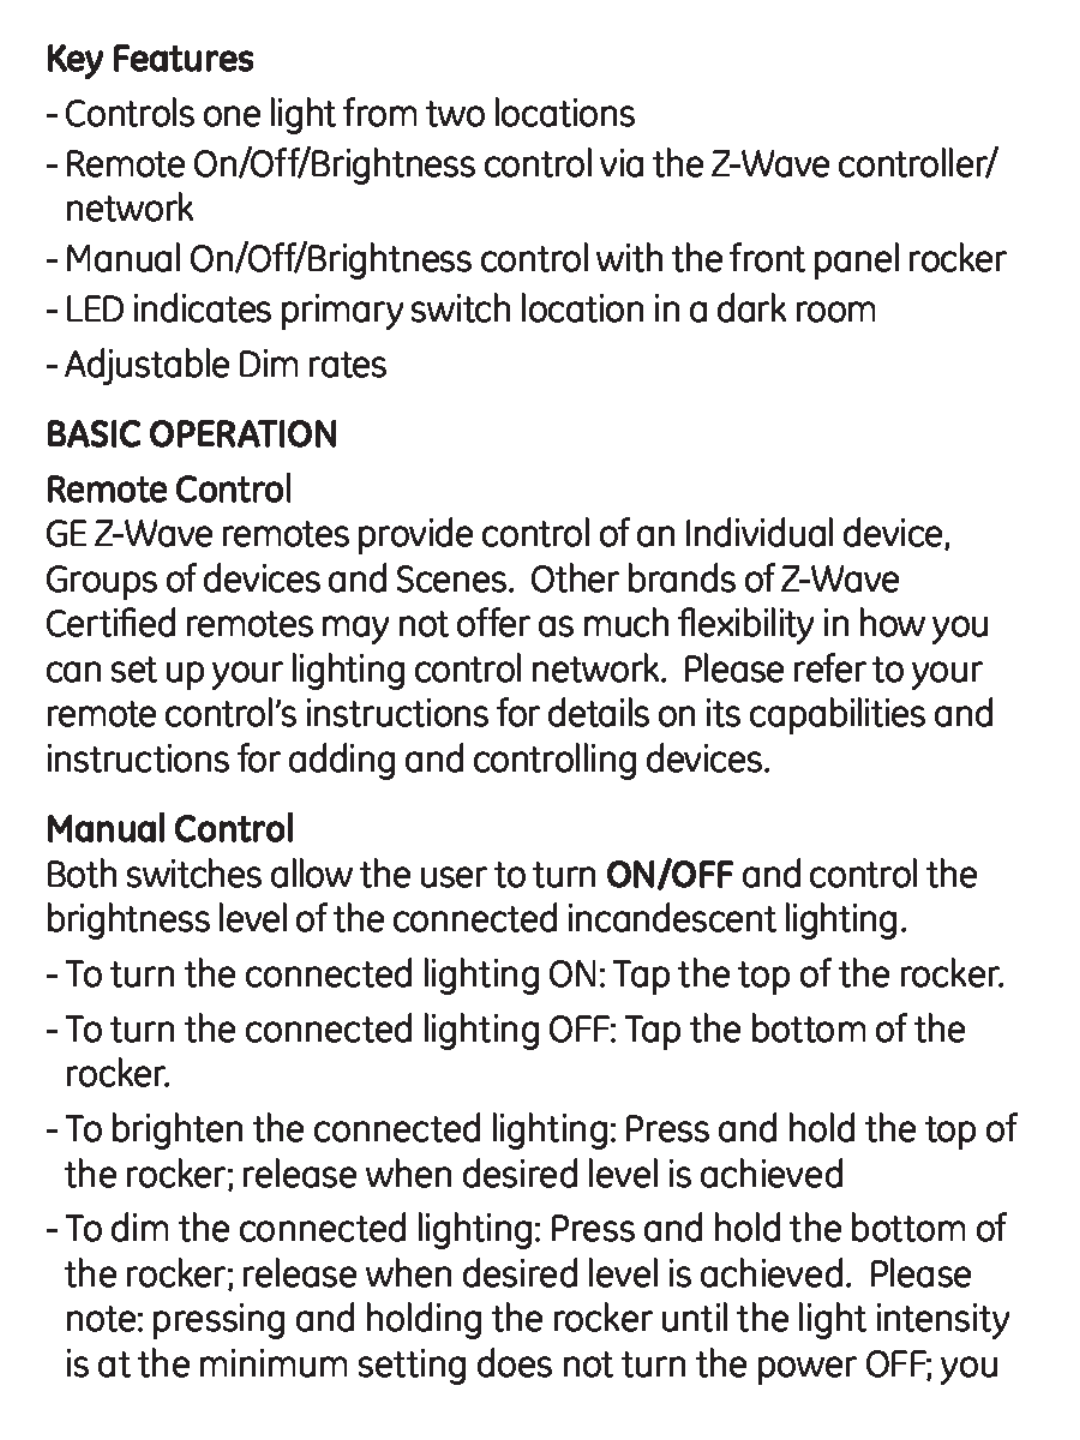 Jasco ZWAVEKIT Key Features, Controls one light from two locations, Adjustable Dim rates, Basic Operation, Remote Control 